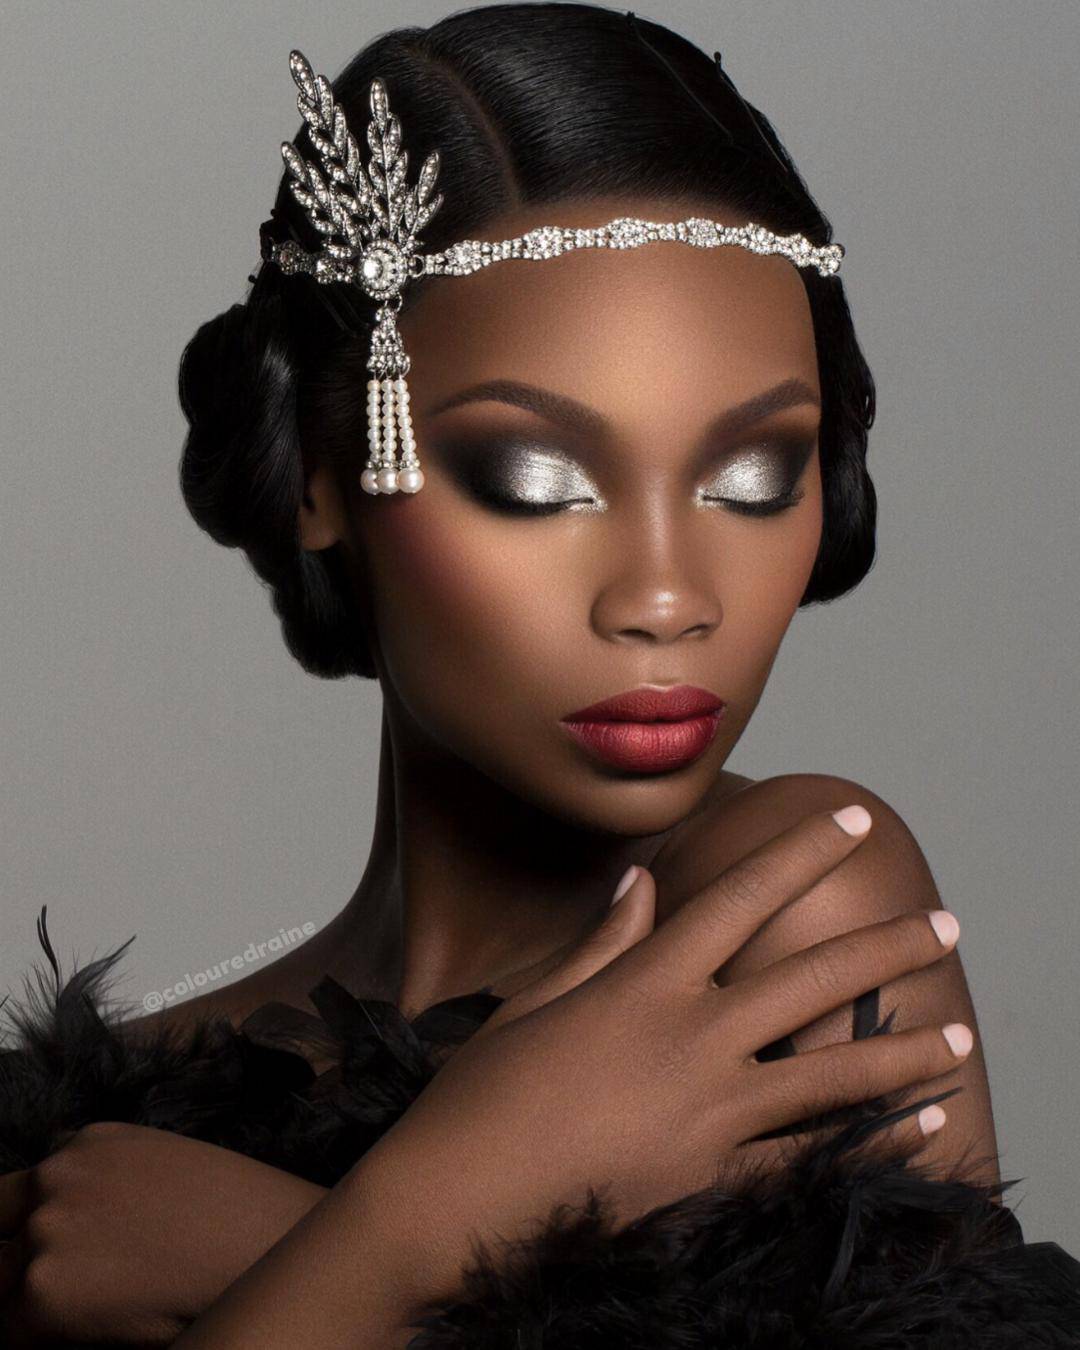 Cheers To The Beauty™ eyeshadow and highlighter palette worn on a dark-skinned model with head dress